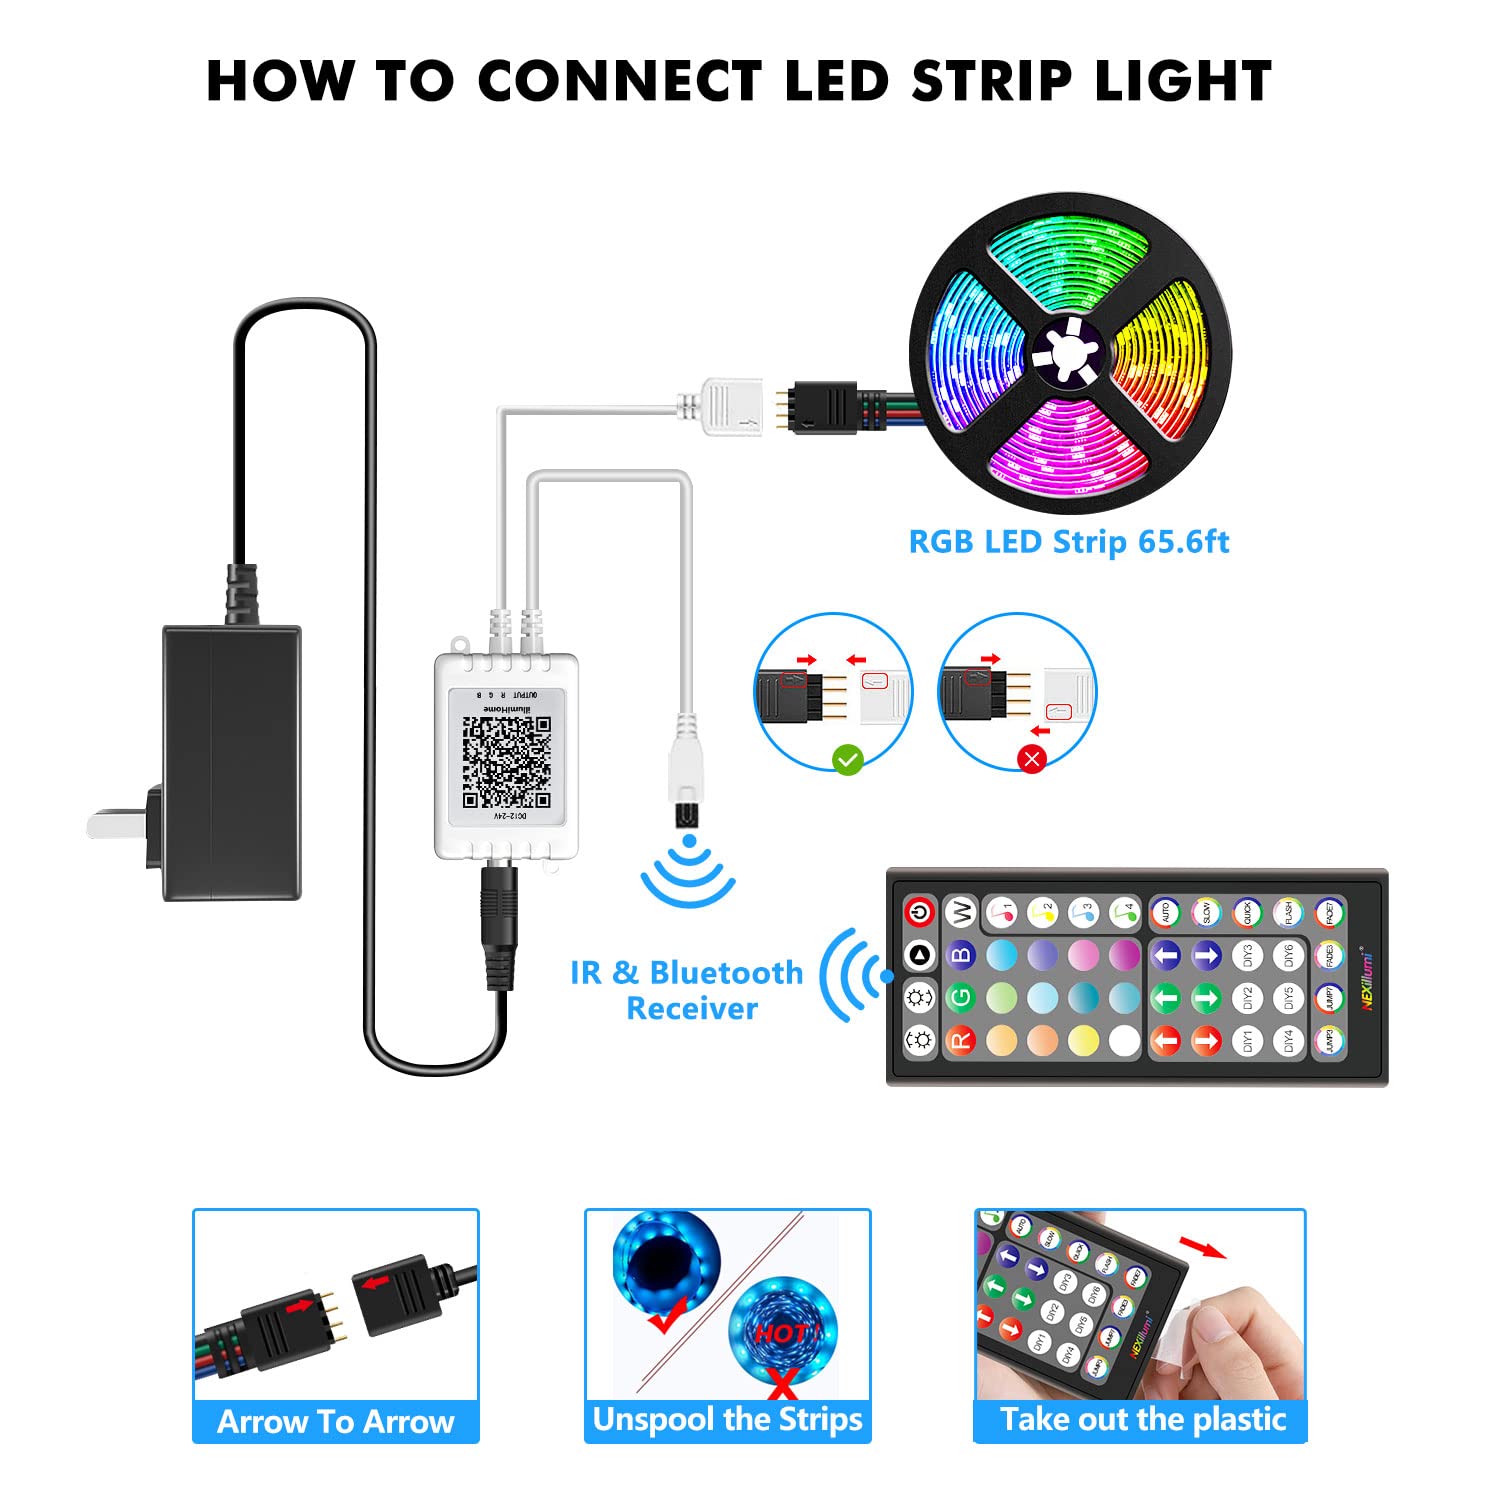 Nexillumi 50Ft Strip Lights Music Sync Color Changing, 44-Key Remote, Sensitive Built-in Mic, App Controlled Rope Lights, 5050 RGB LED (APP+Remote+Mic)